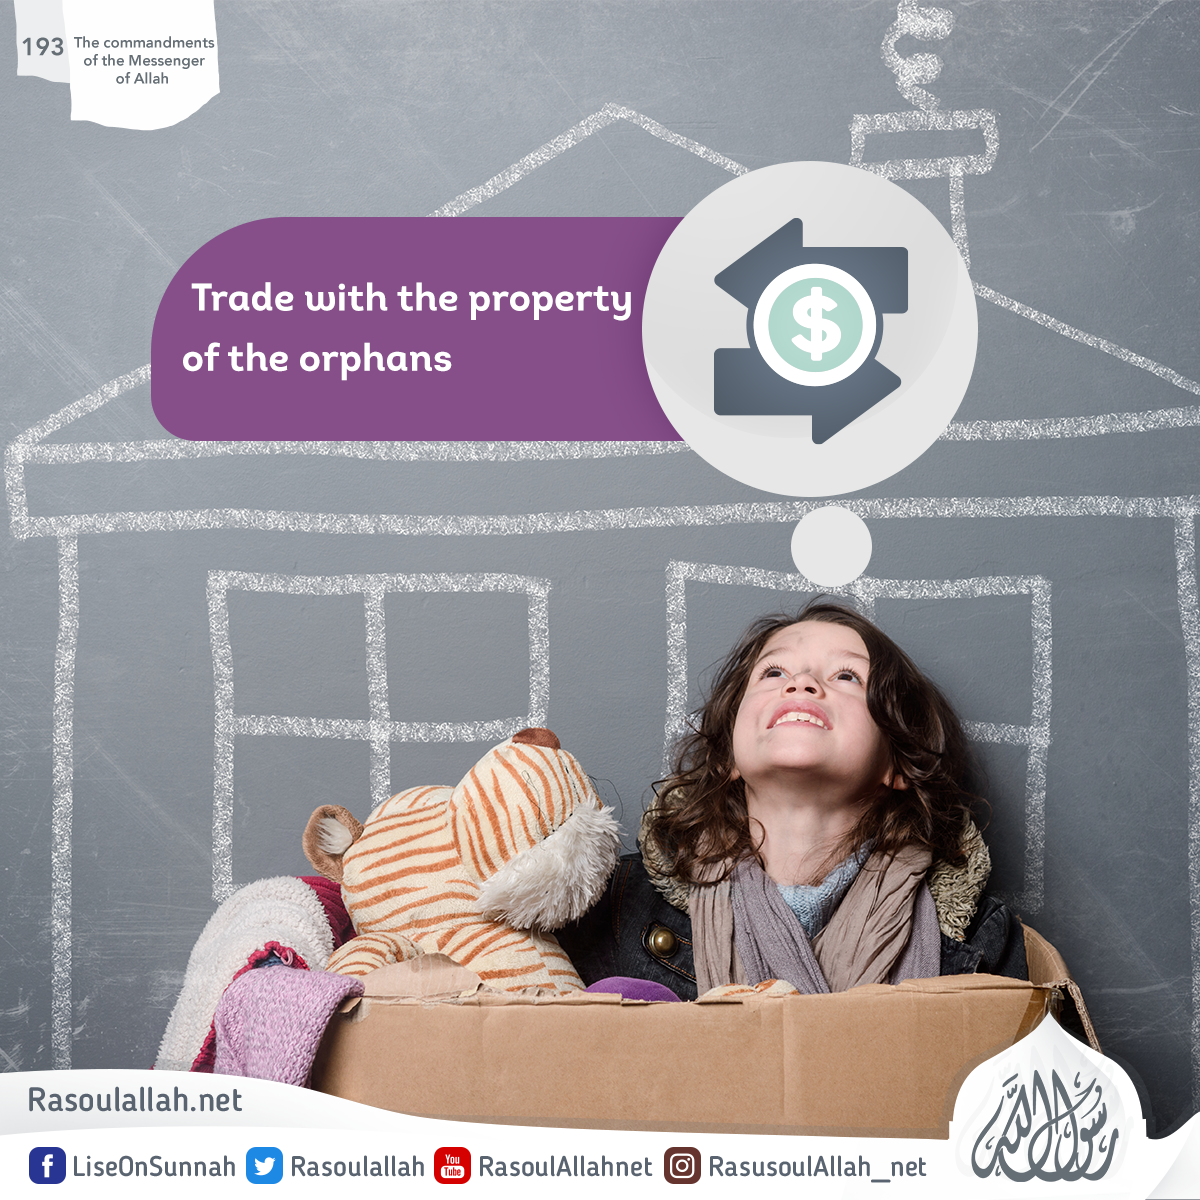 Trade with the property of the orphans